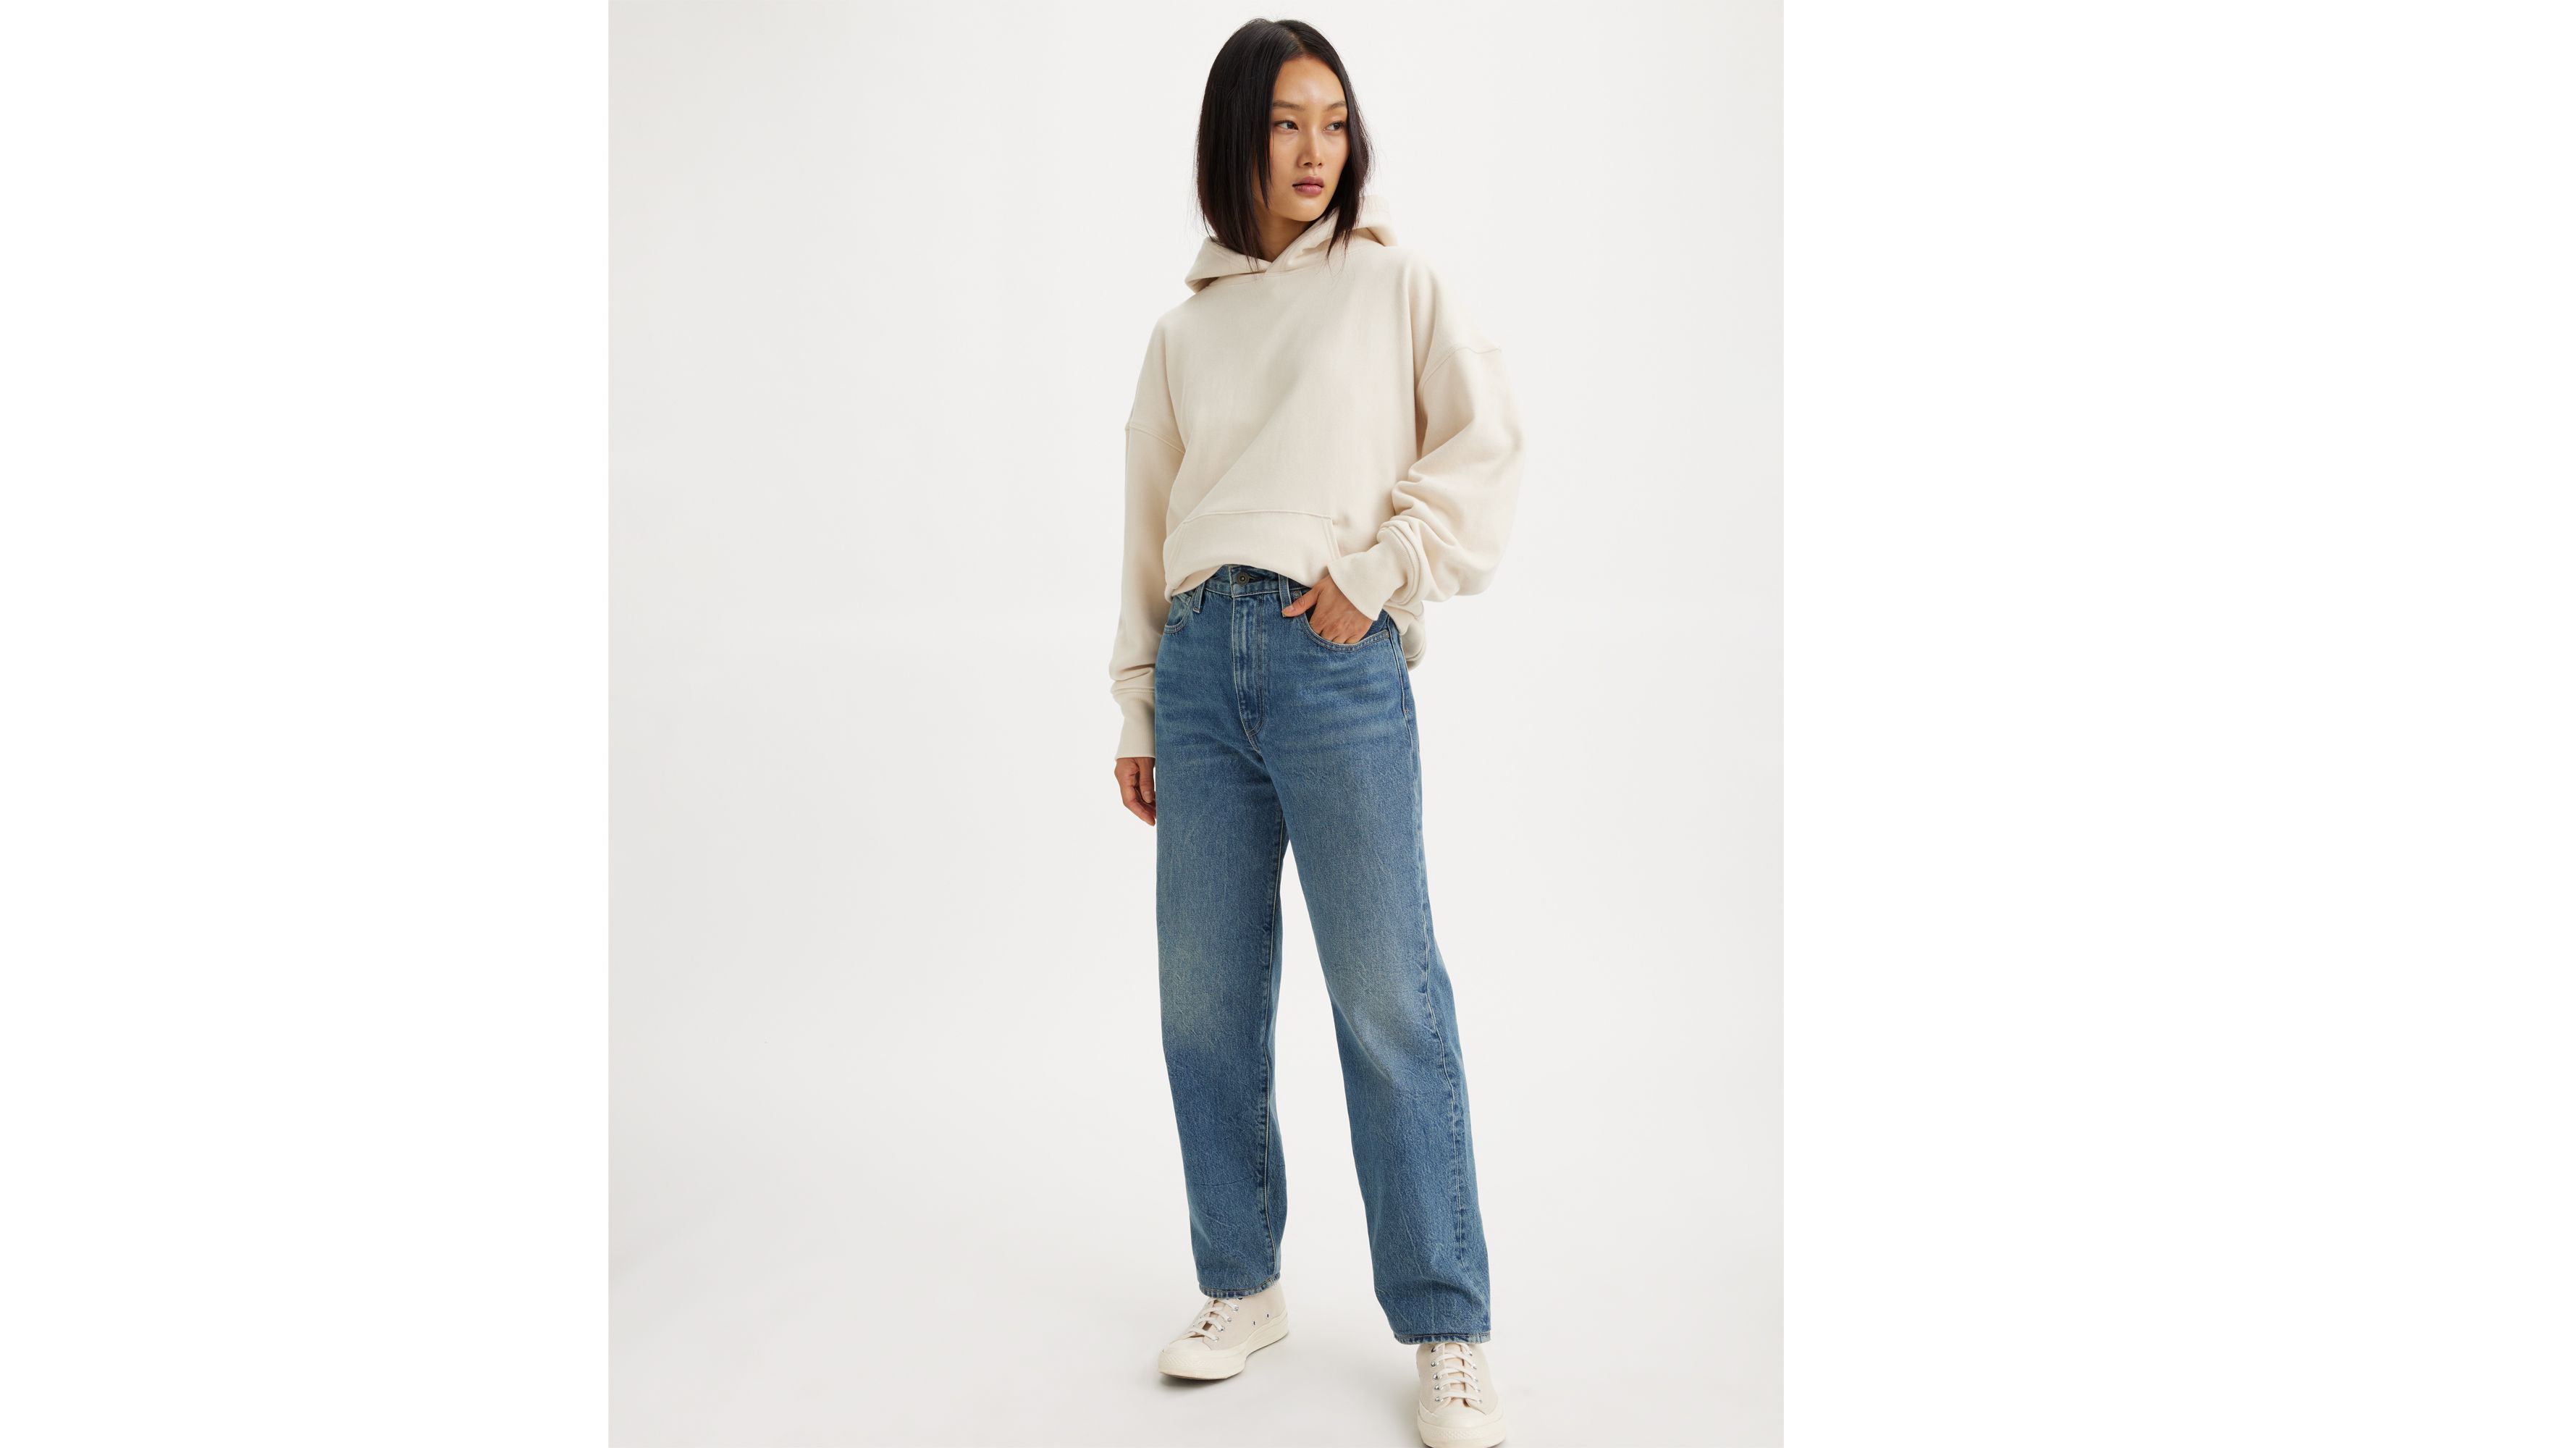 Long Inseam Jeans for Tall Women 